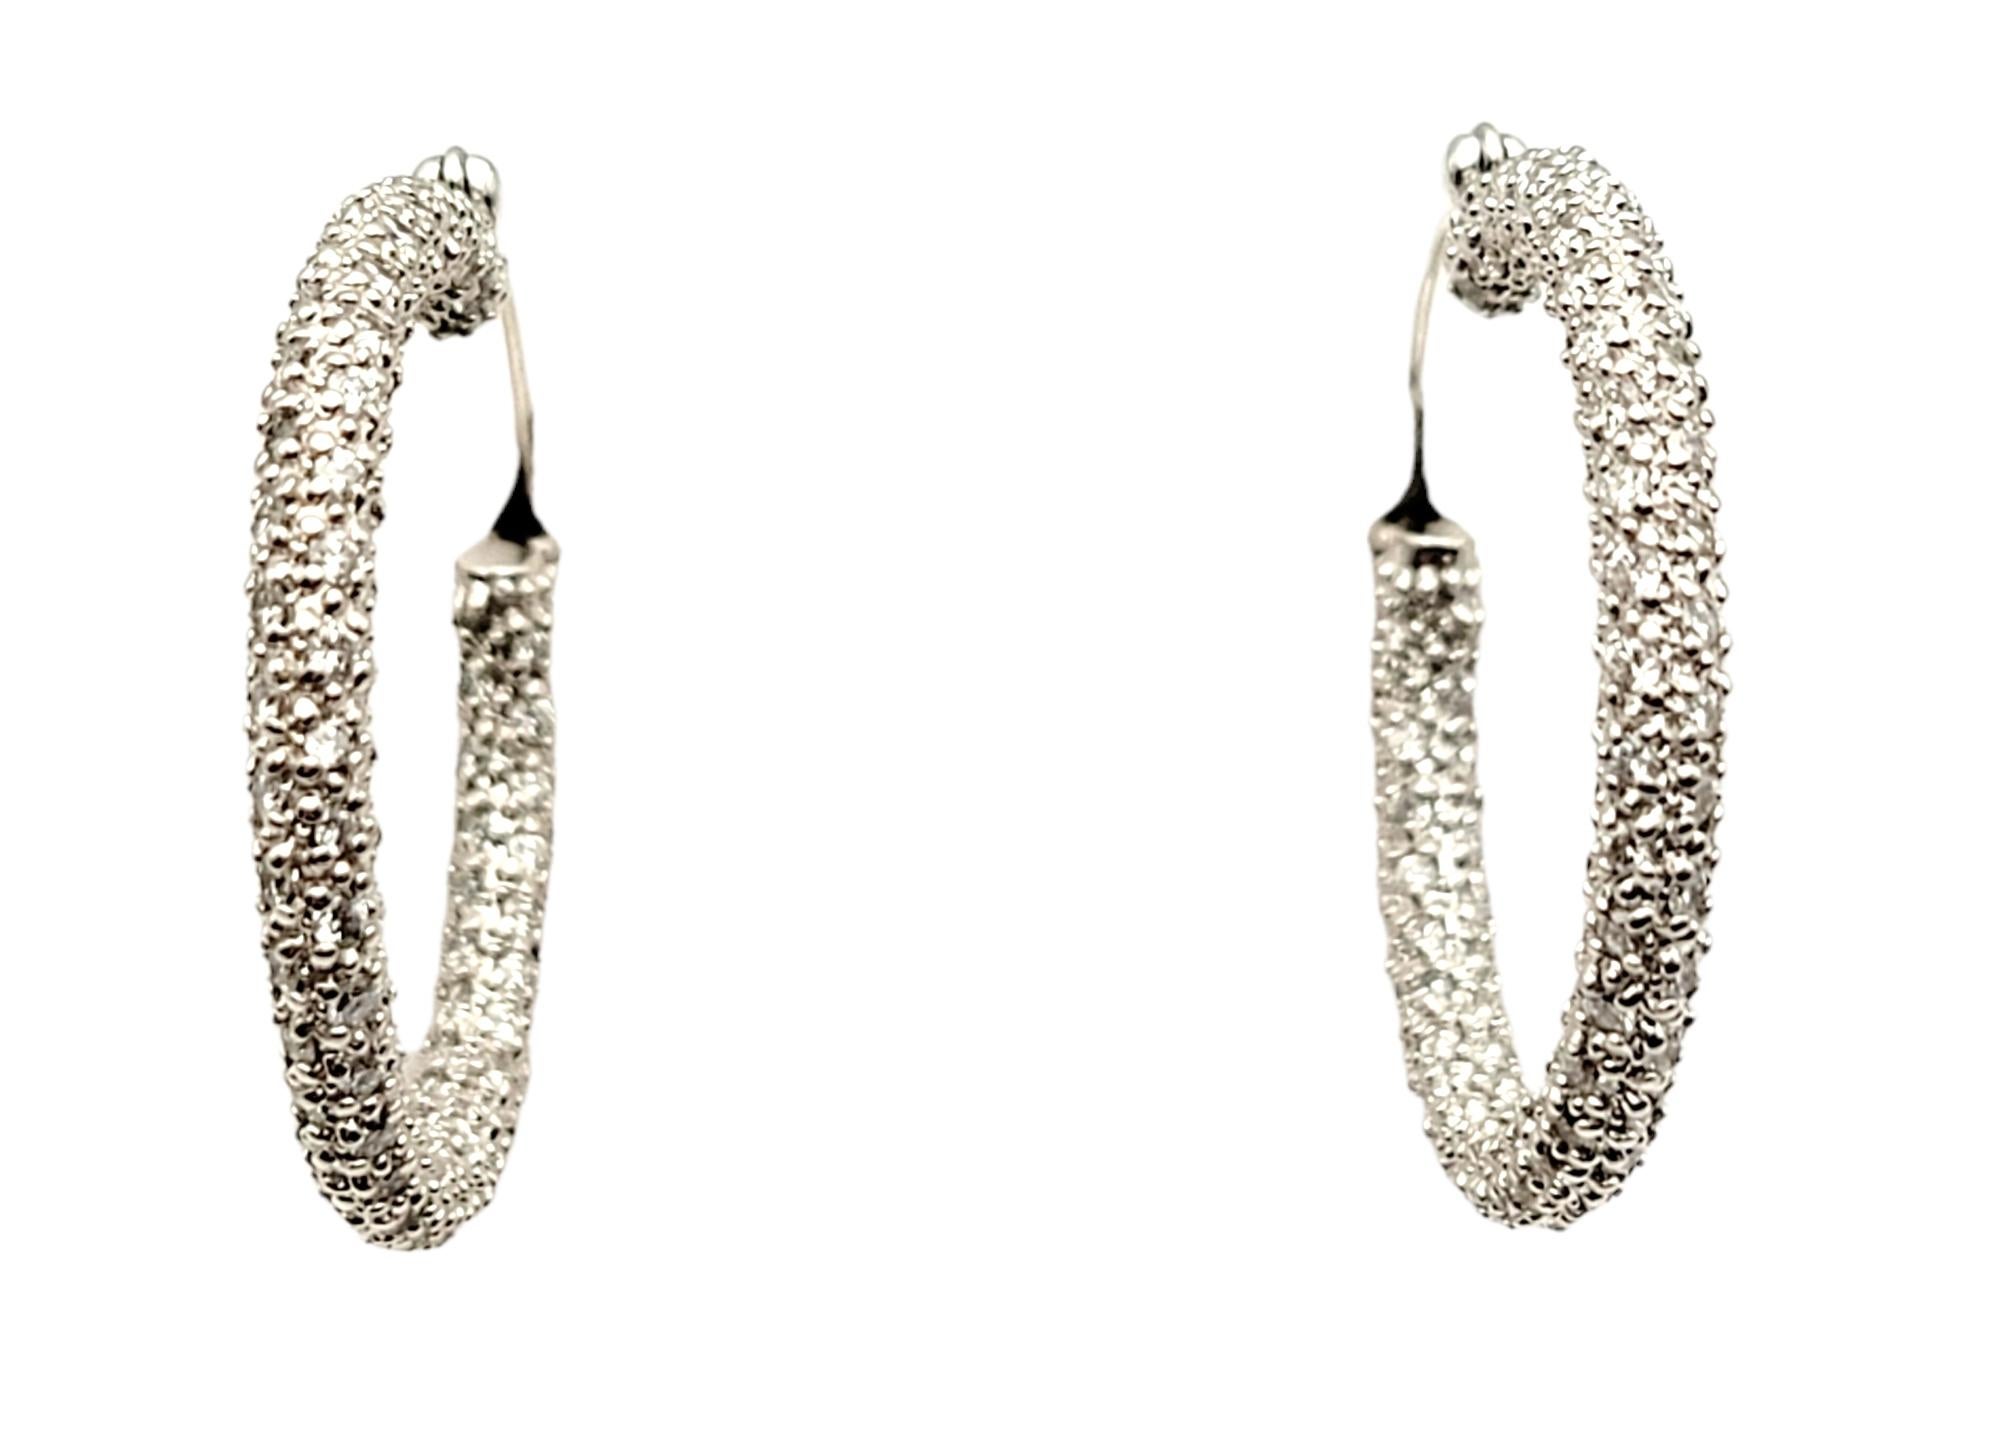 If you are looking for dazzling sparkle from every angle, these stunning pave diamond hoop earrings will not disappoint! Arranged in a unique inside/outside setting, the diamonds are positioned to catch the light from different angles, making your